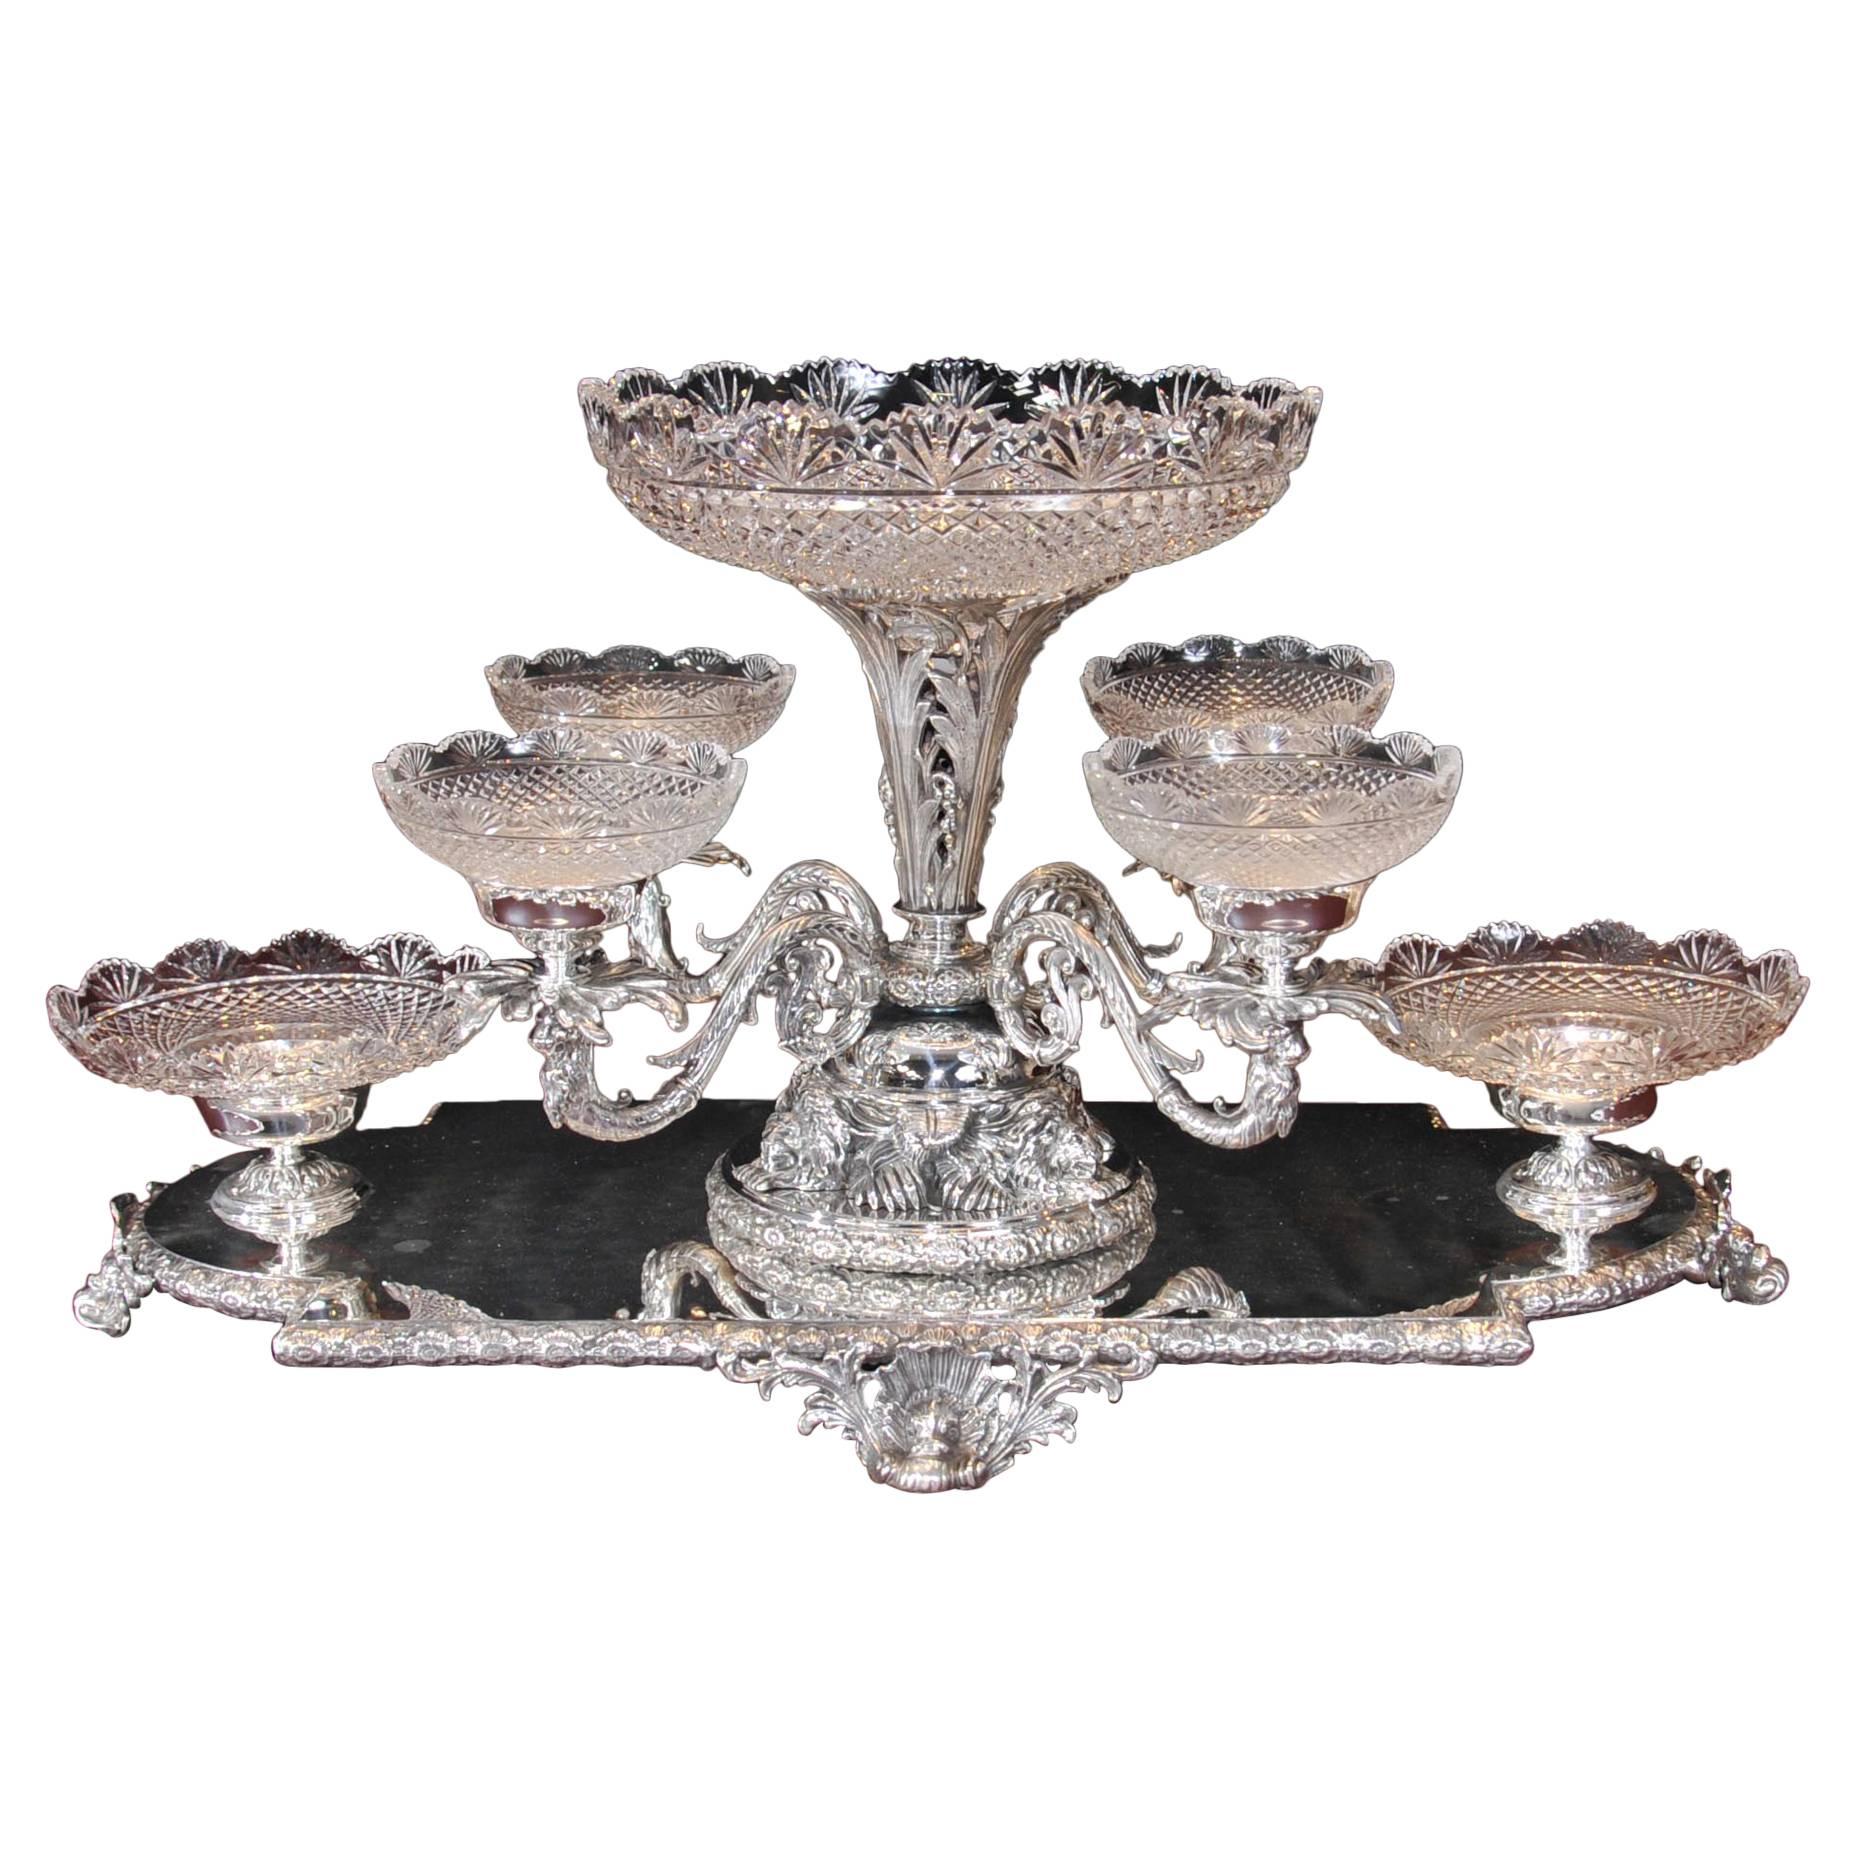 Sheffield Silver Plate Centrepiece Glass Epergne Victorian Platter For Sale